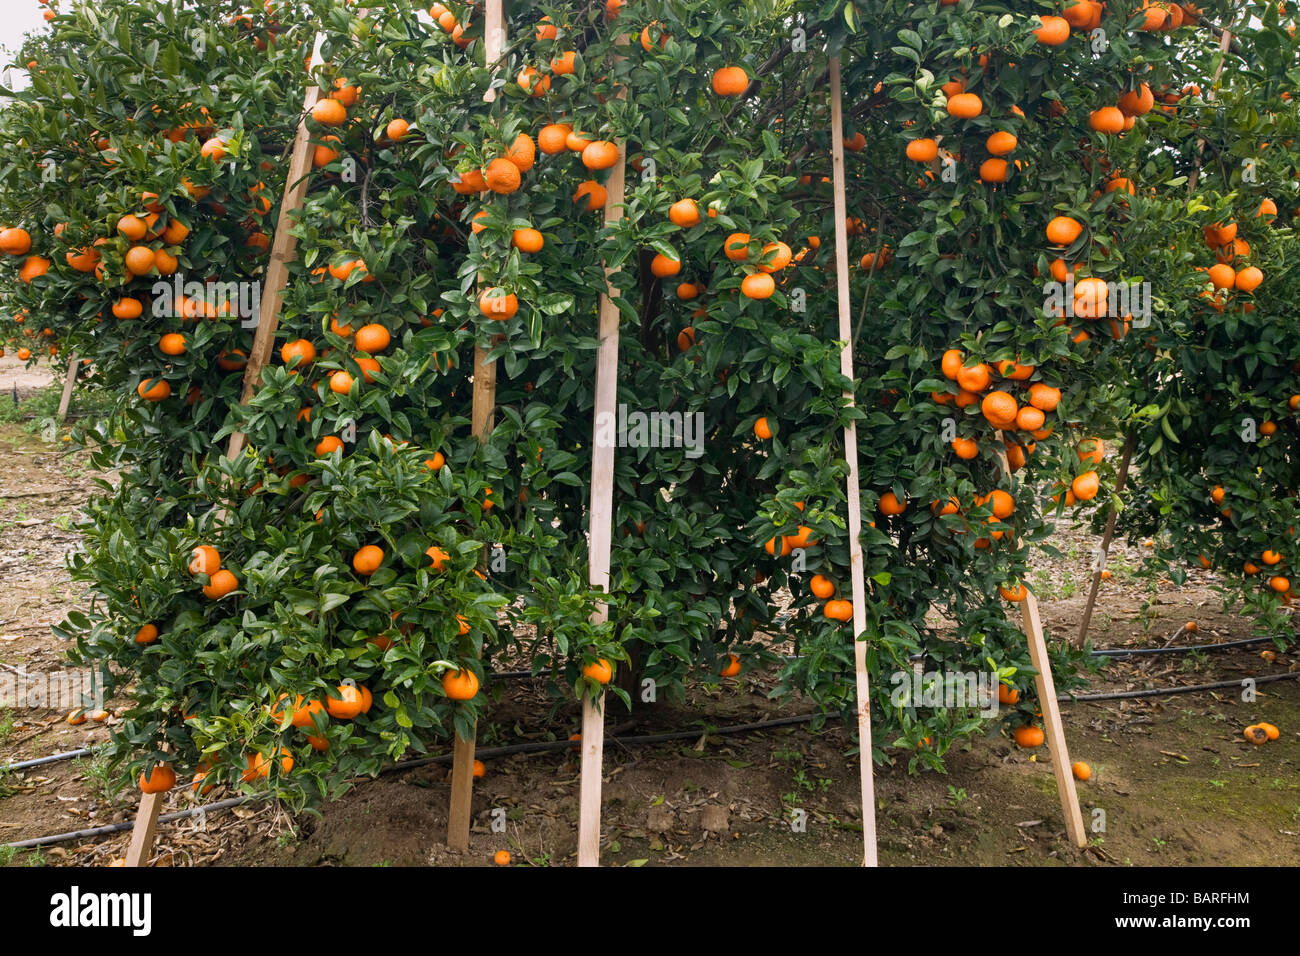 Ripe Mandarins on tree, stakes supporting branches. Stock Photo